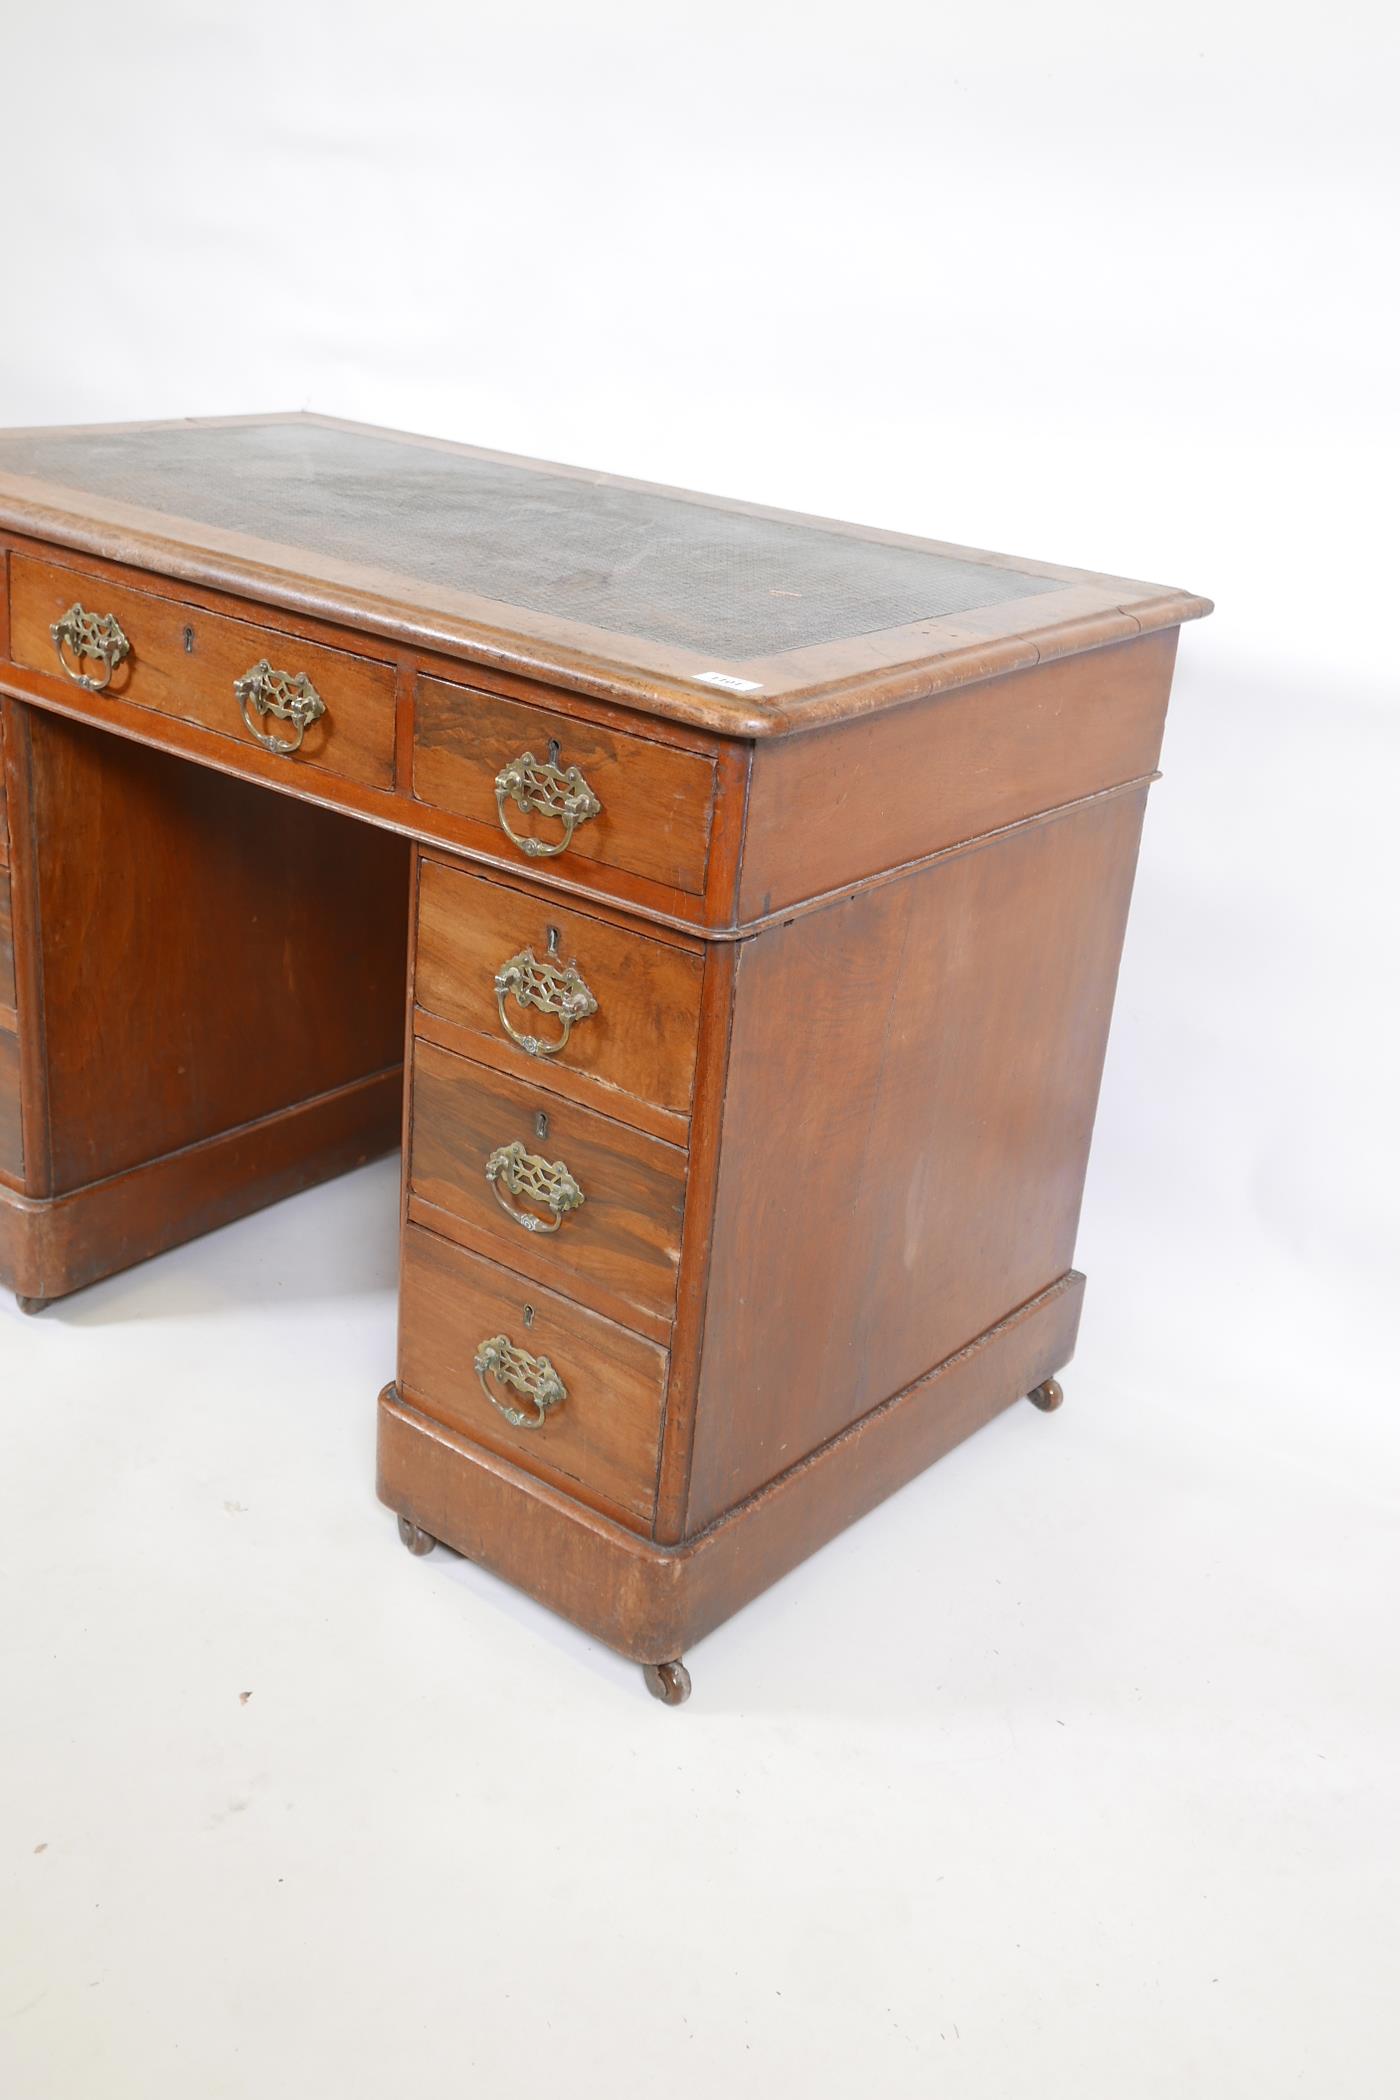 A Victorian walnut pedestal desk with an inset leather top and nine drawers, 40" x 23", 27" high - Image 4 of 6